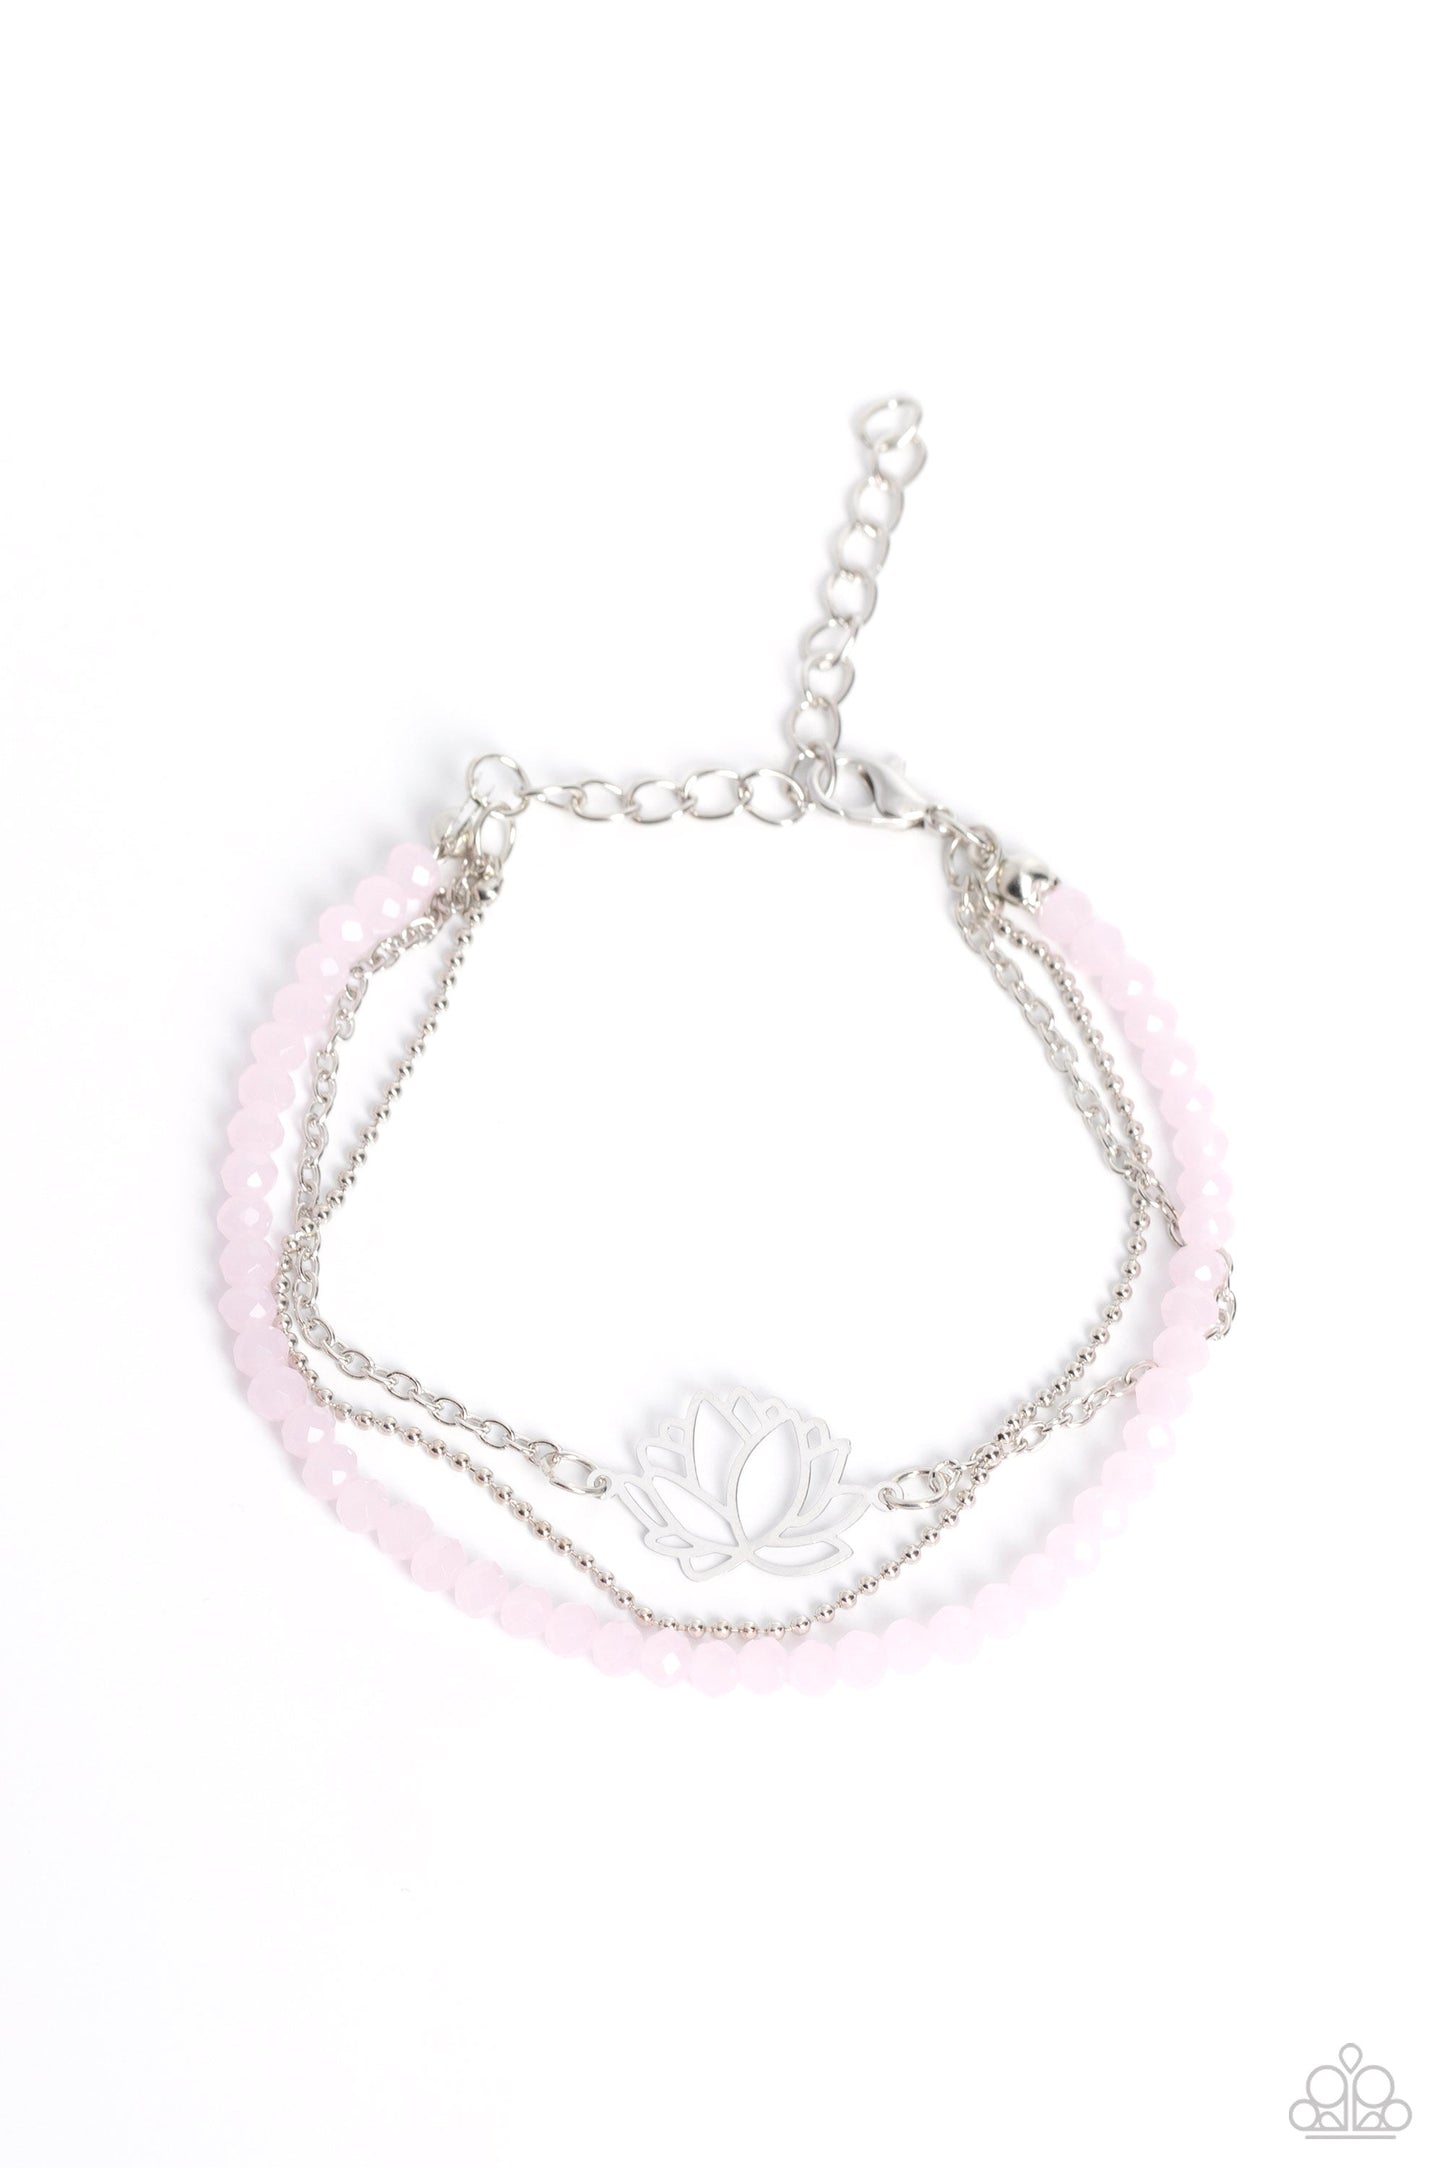 A LOTUS Like This - Pink Faceted Beads, Dainty Silver Chain, & Silver Lotus Charm Paparazzi Adjustable Bracelet